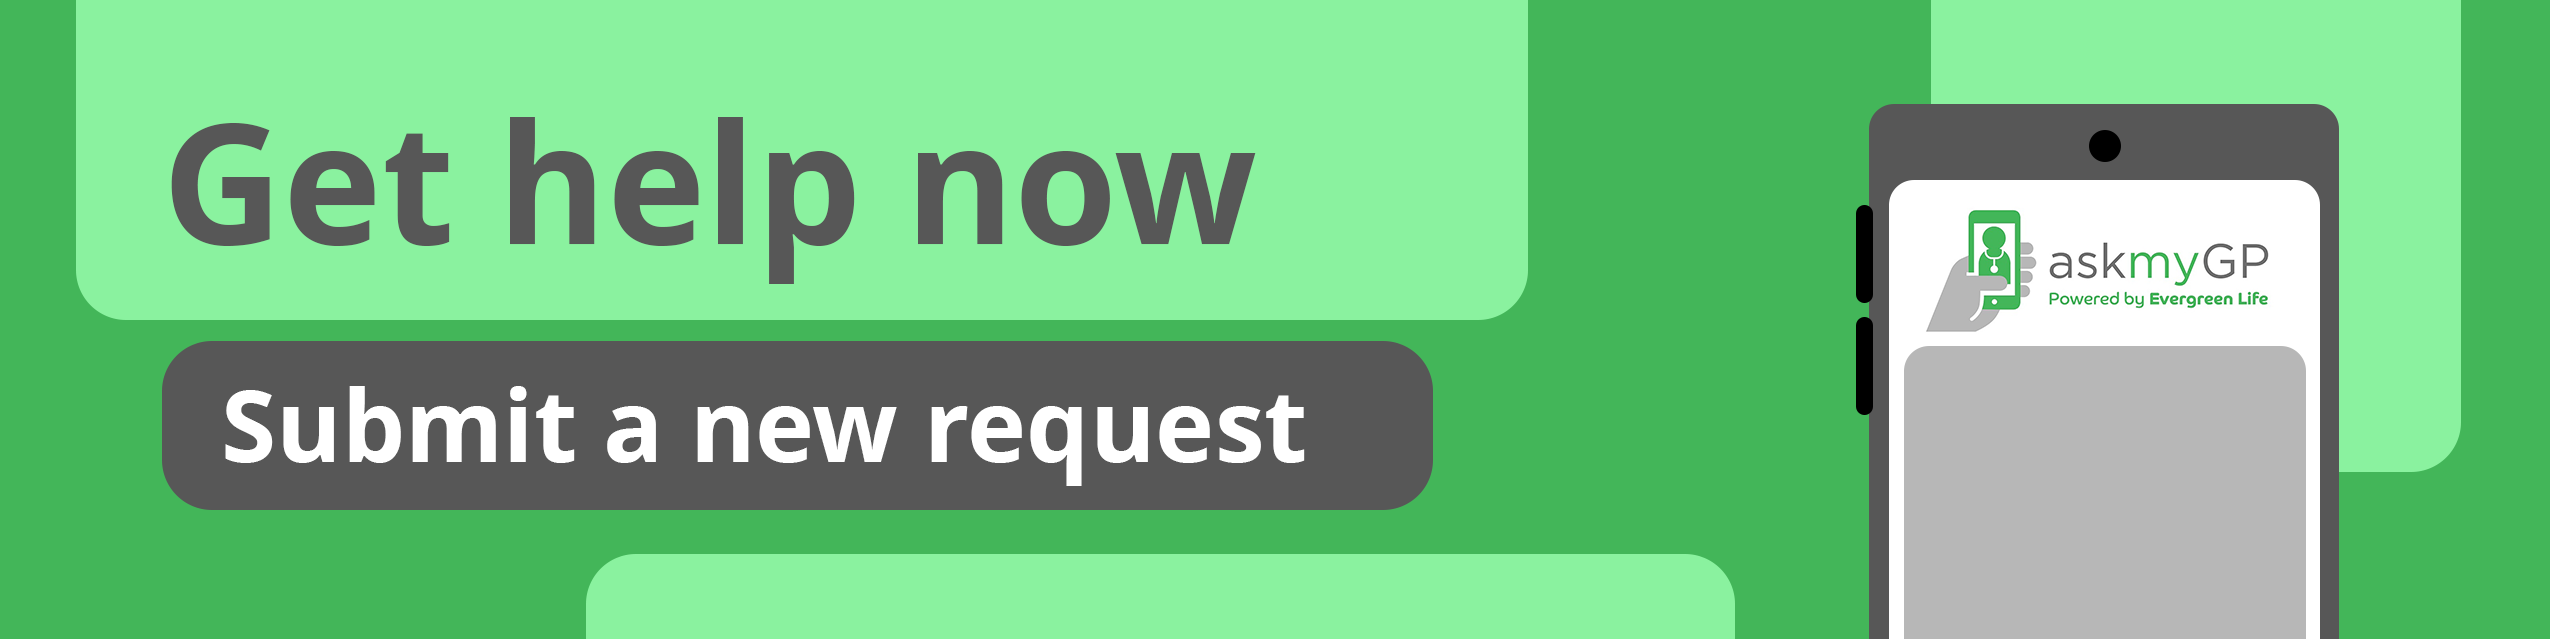 get help now - submit a new request